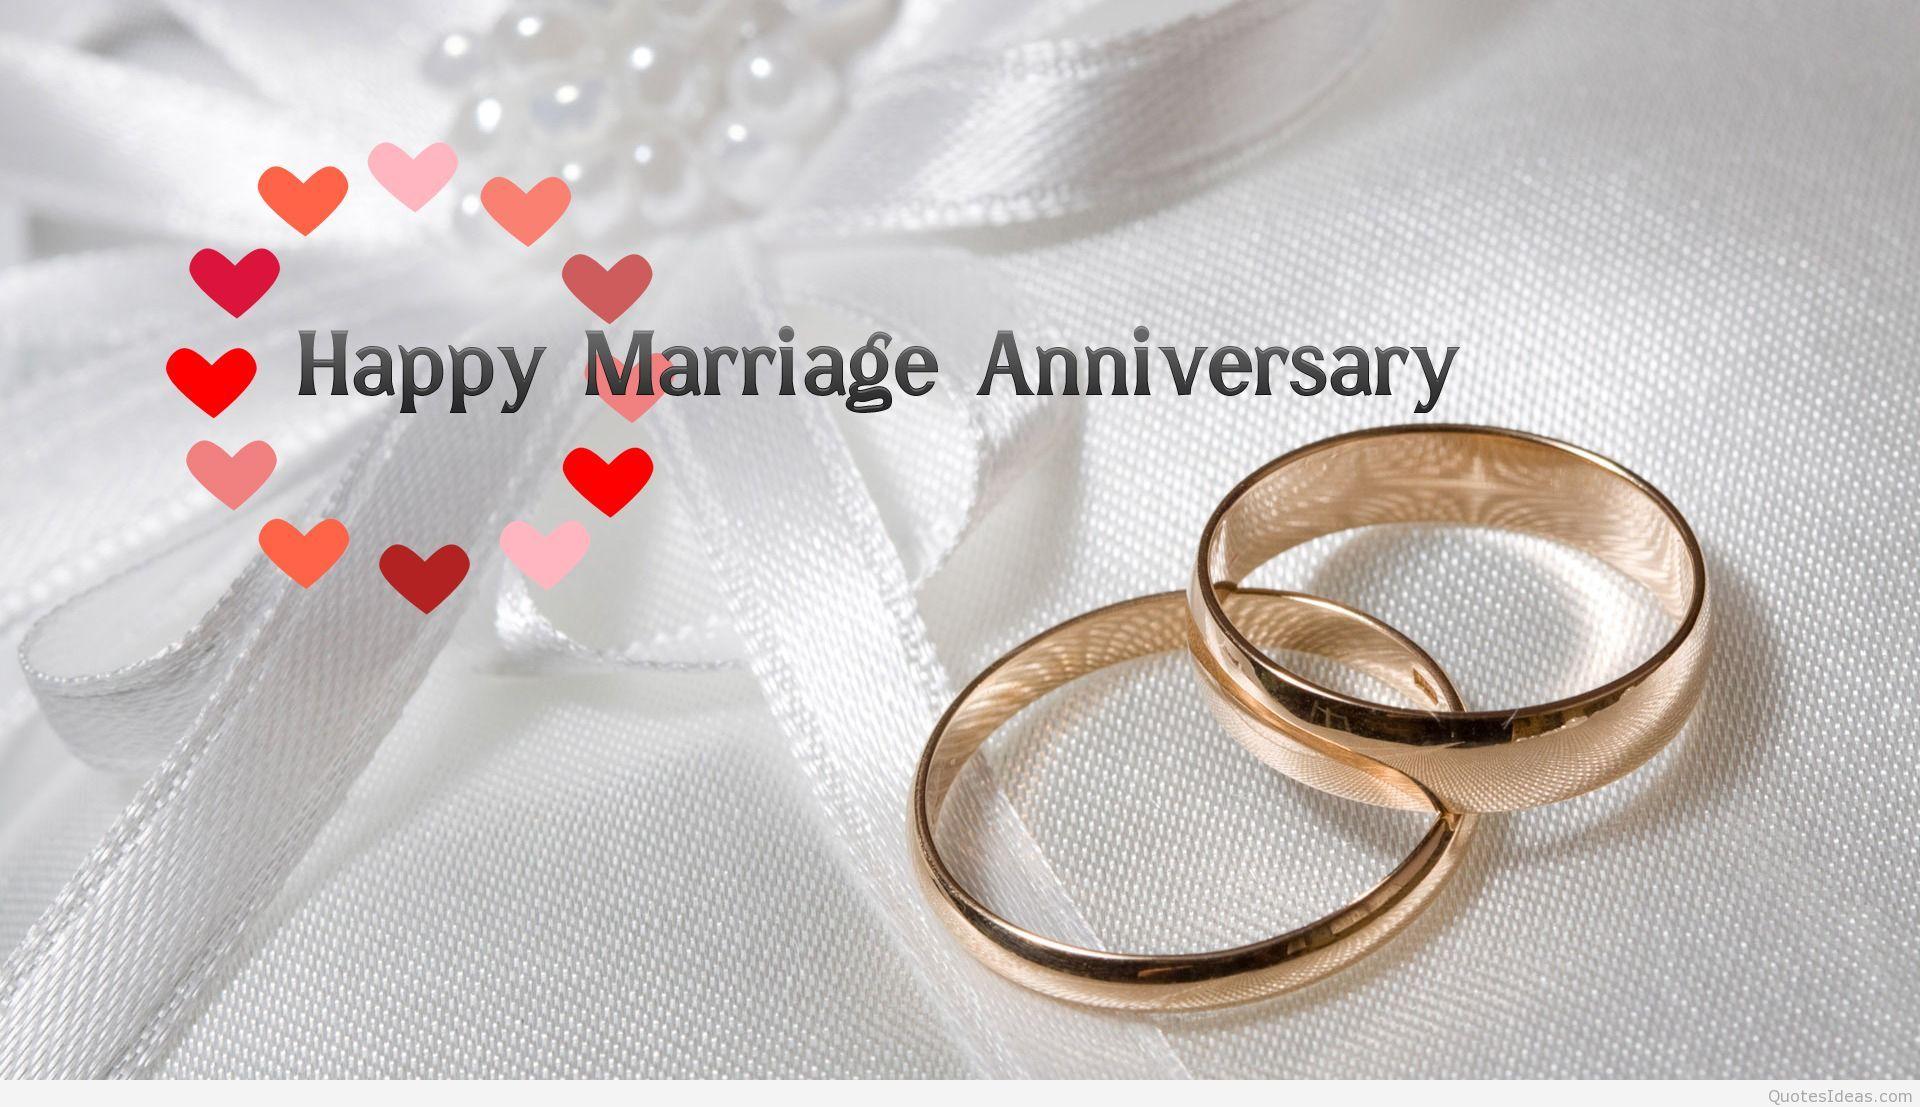 Happy 5rd marriage anniversary card wallpaper 2015 2016